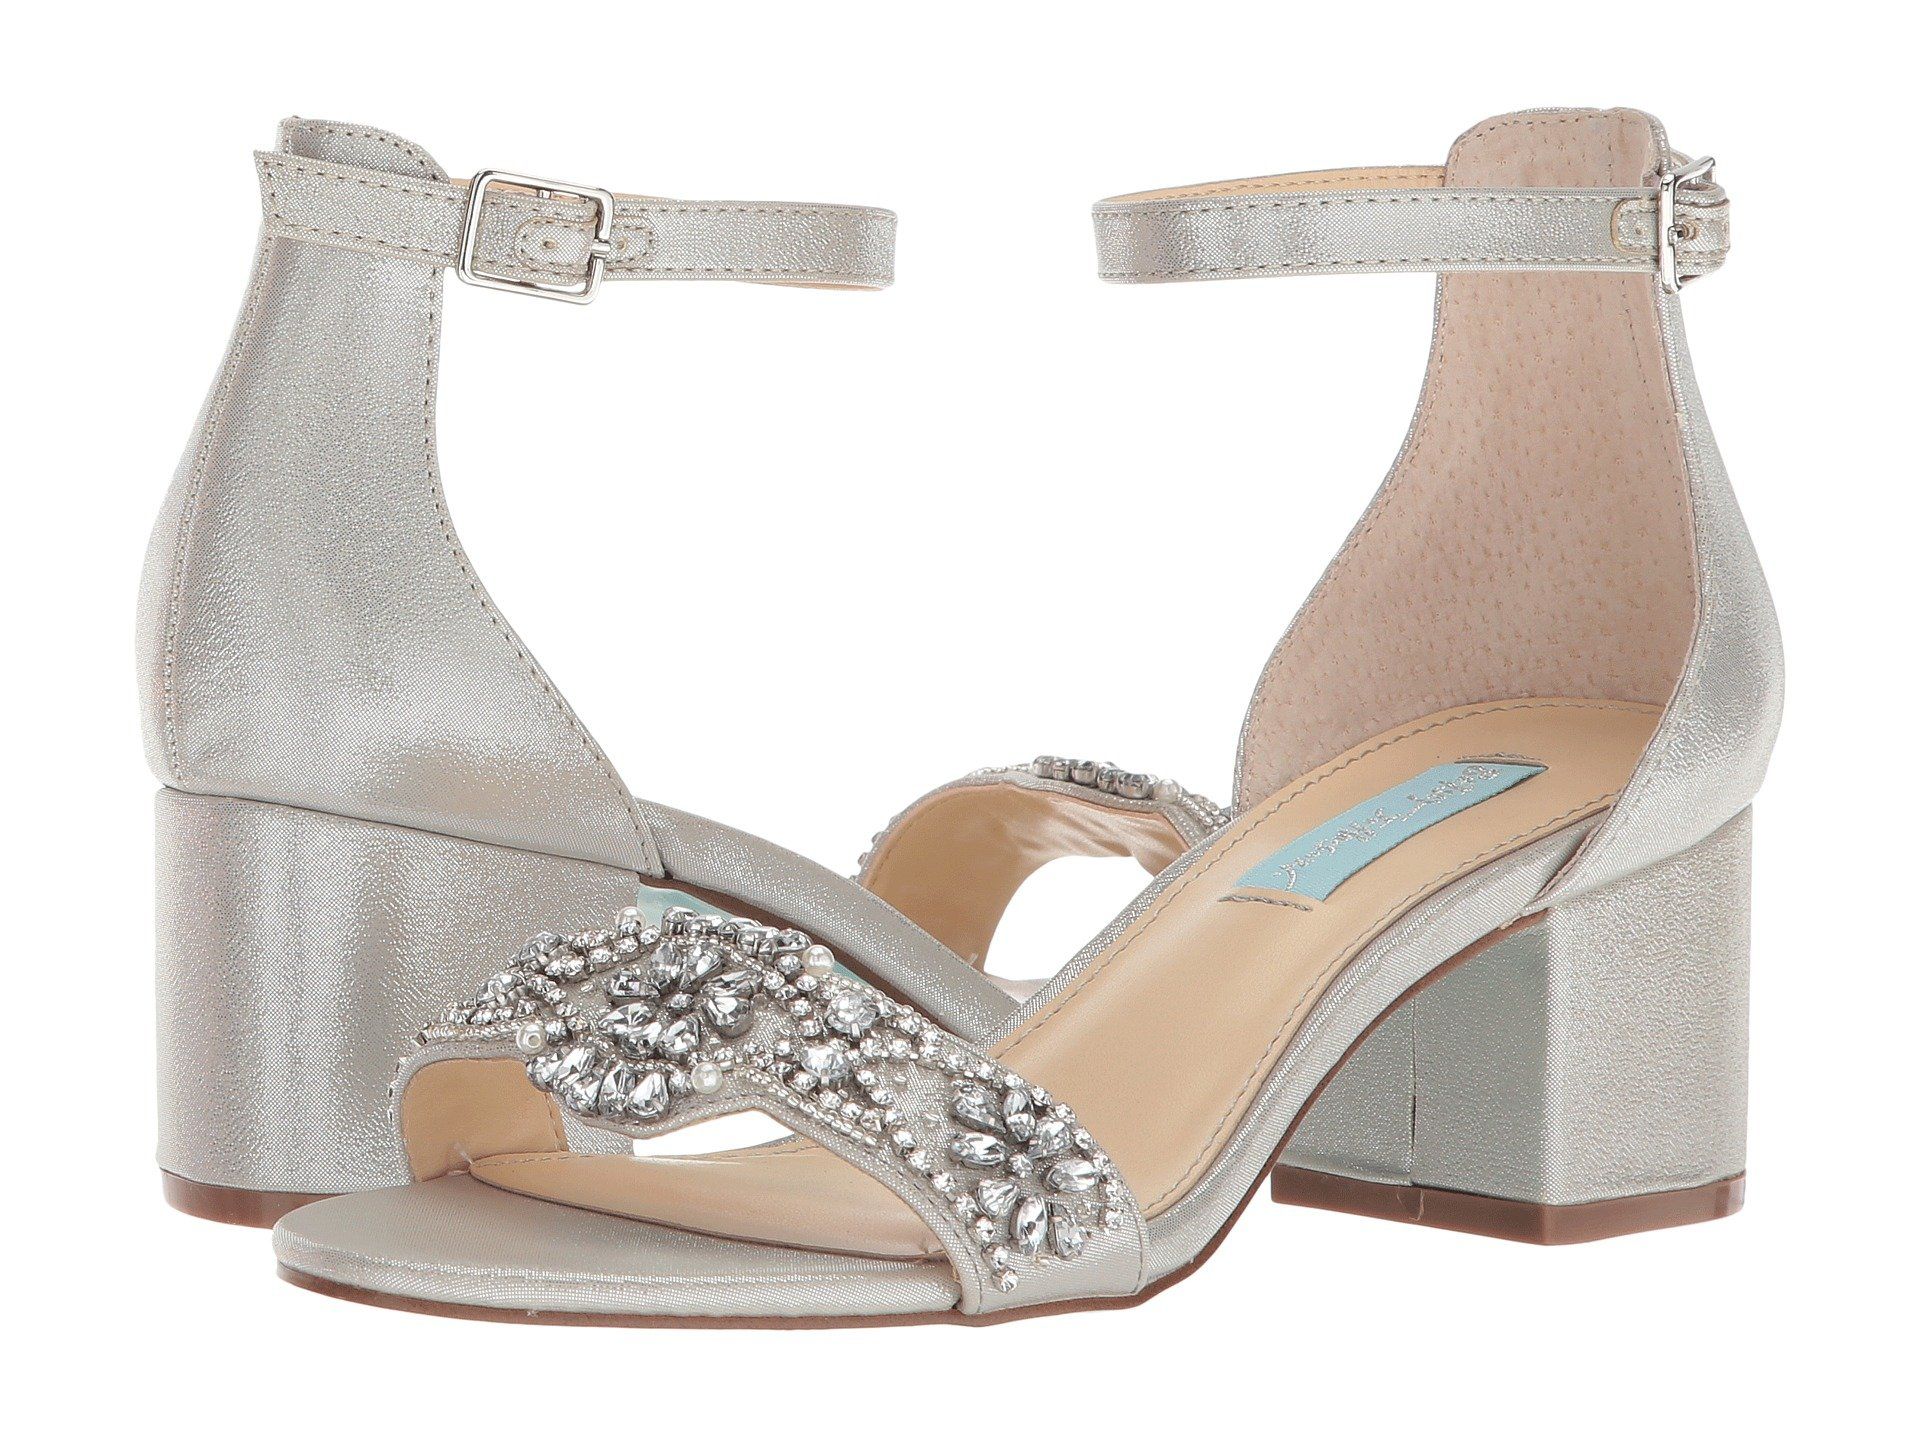 18 comfortable heels you can actually dance in